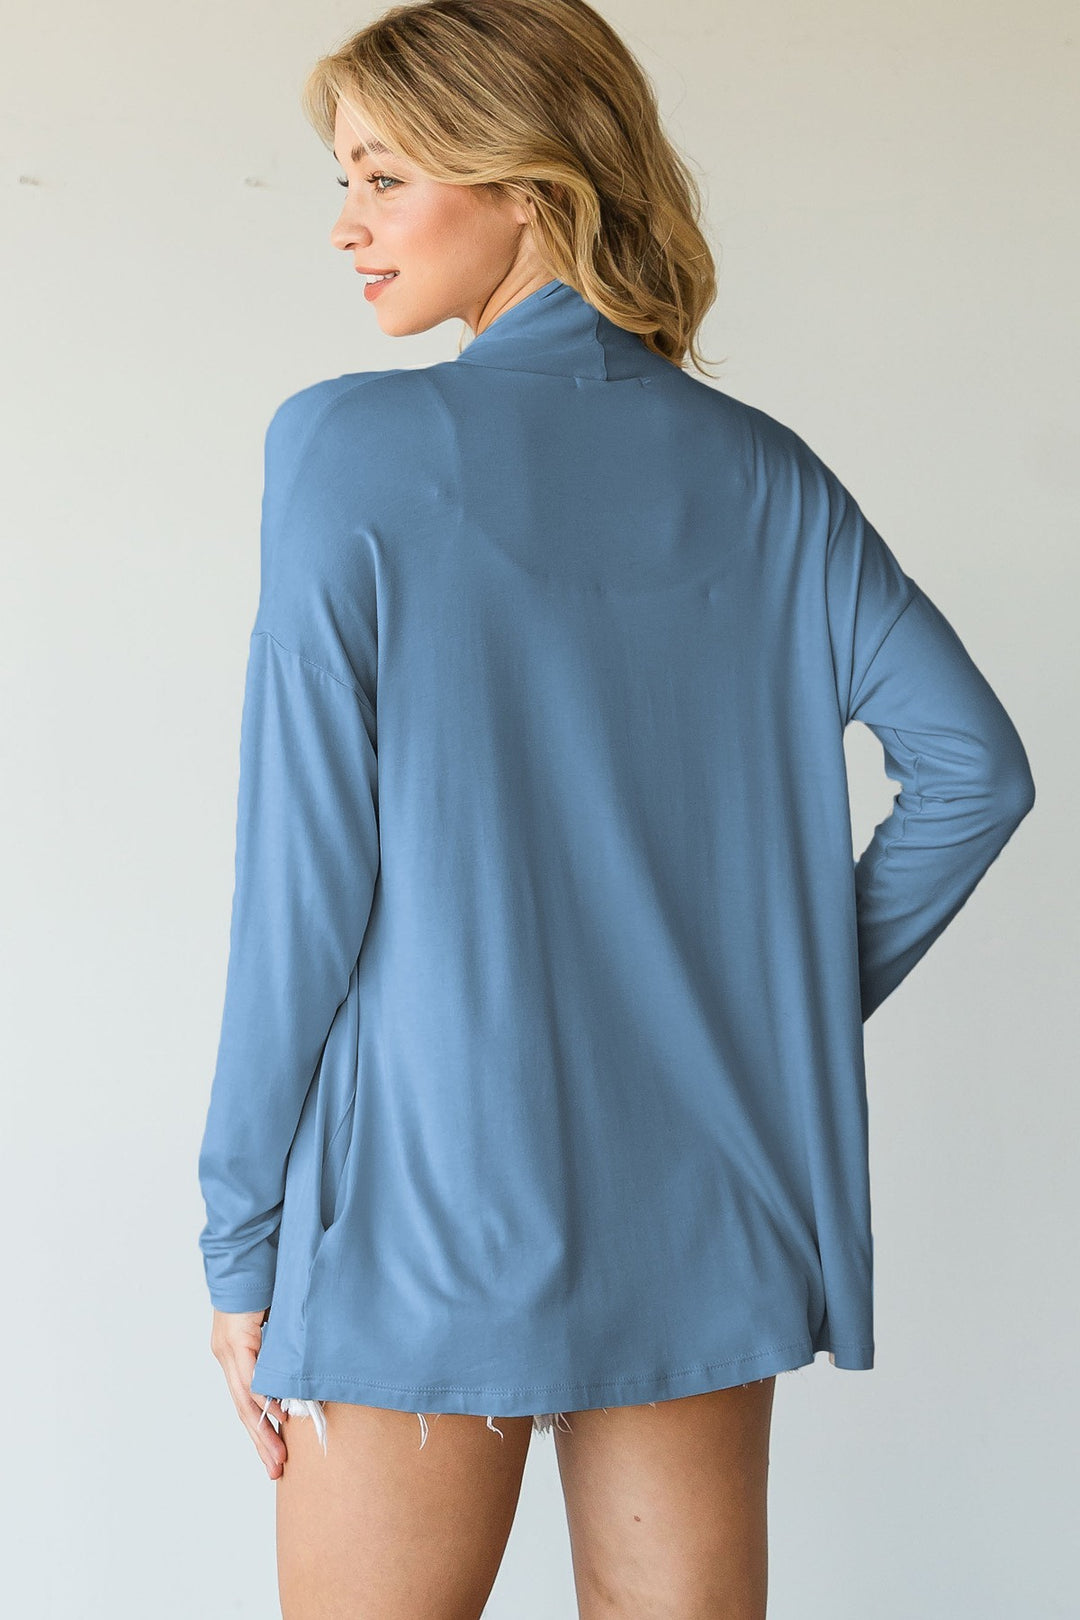 Casual Cardigan Featuring Collar And Side Pockets in Slate Blue